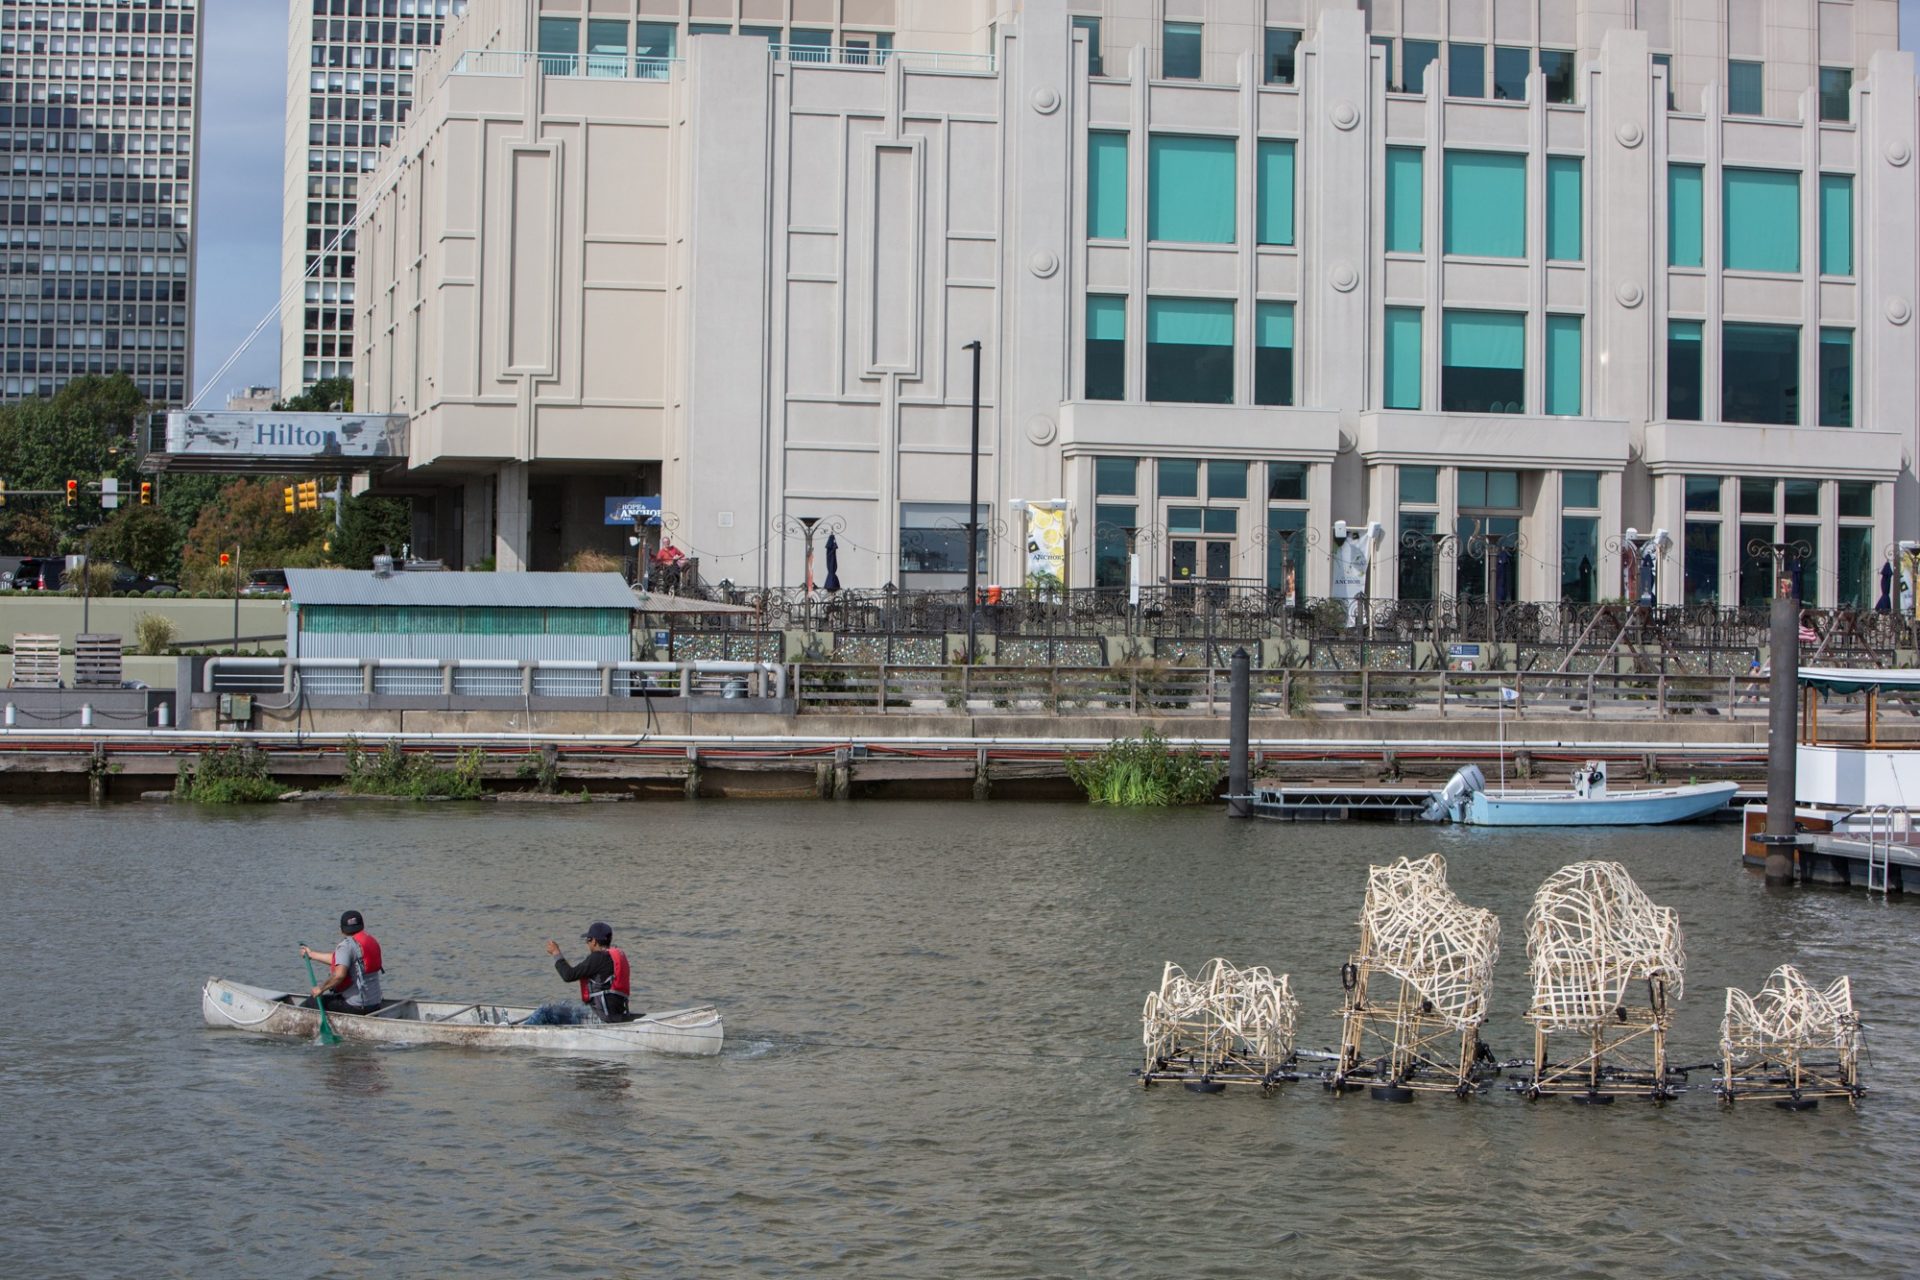 Two installers maneuver a canoe to steer Talasnik's sculpture into place.